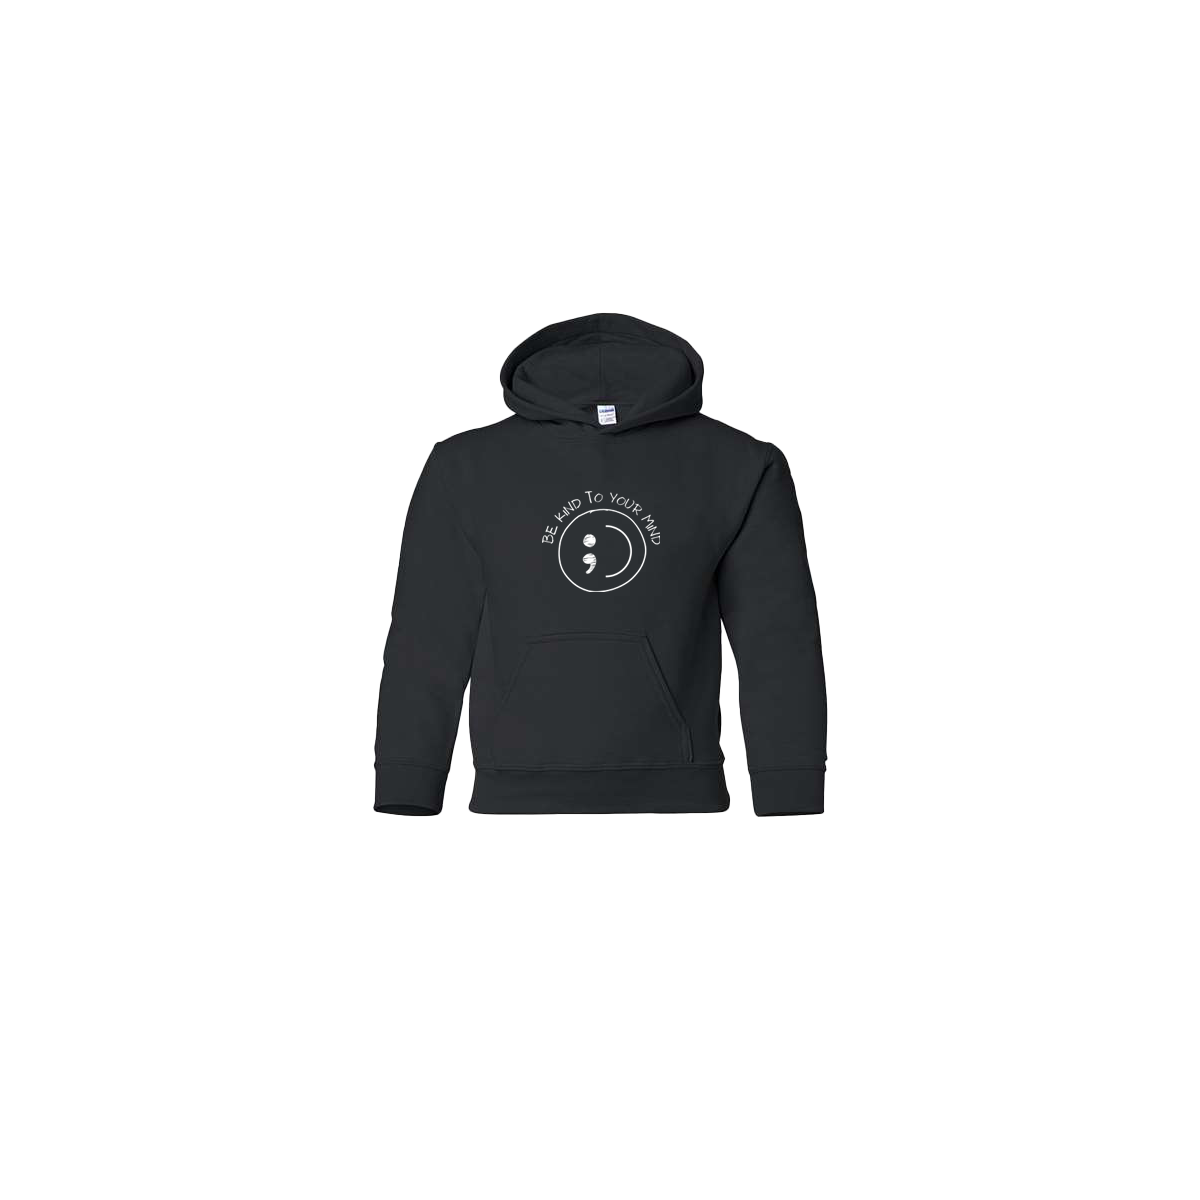 Be Kind To Your Mind Smiley Face Embroidered Black Youth Hoodie